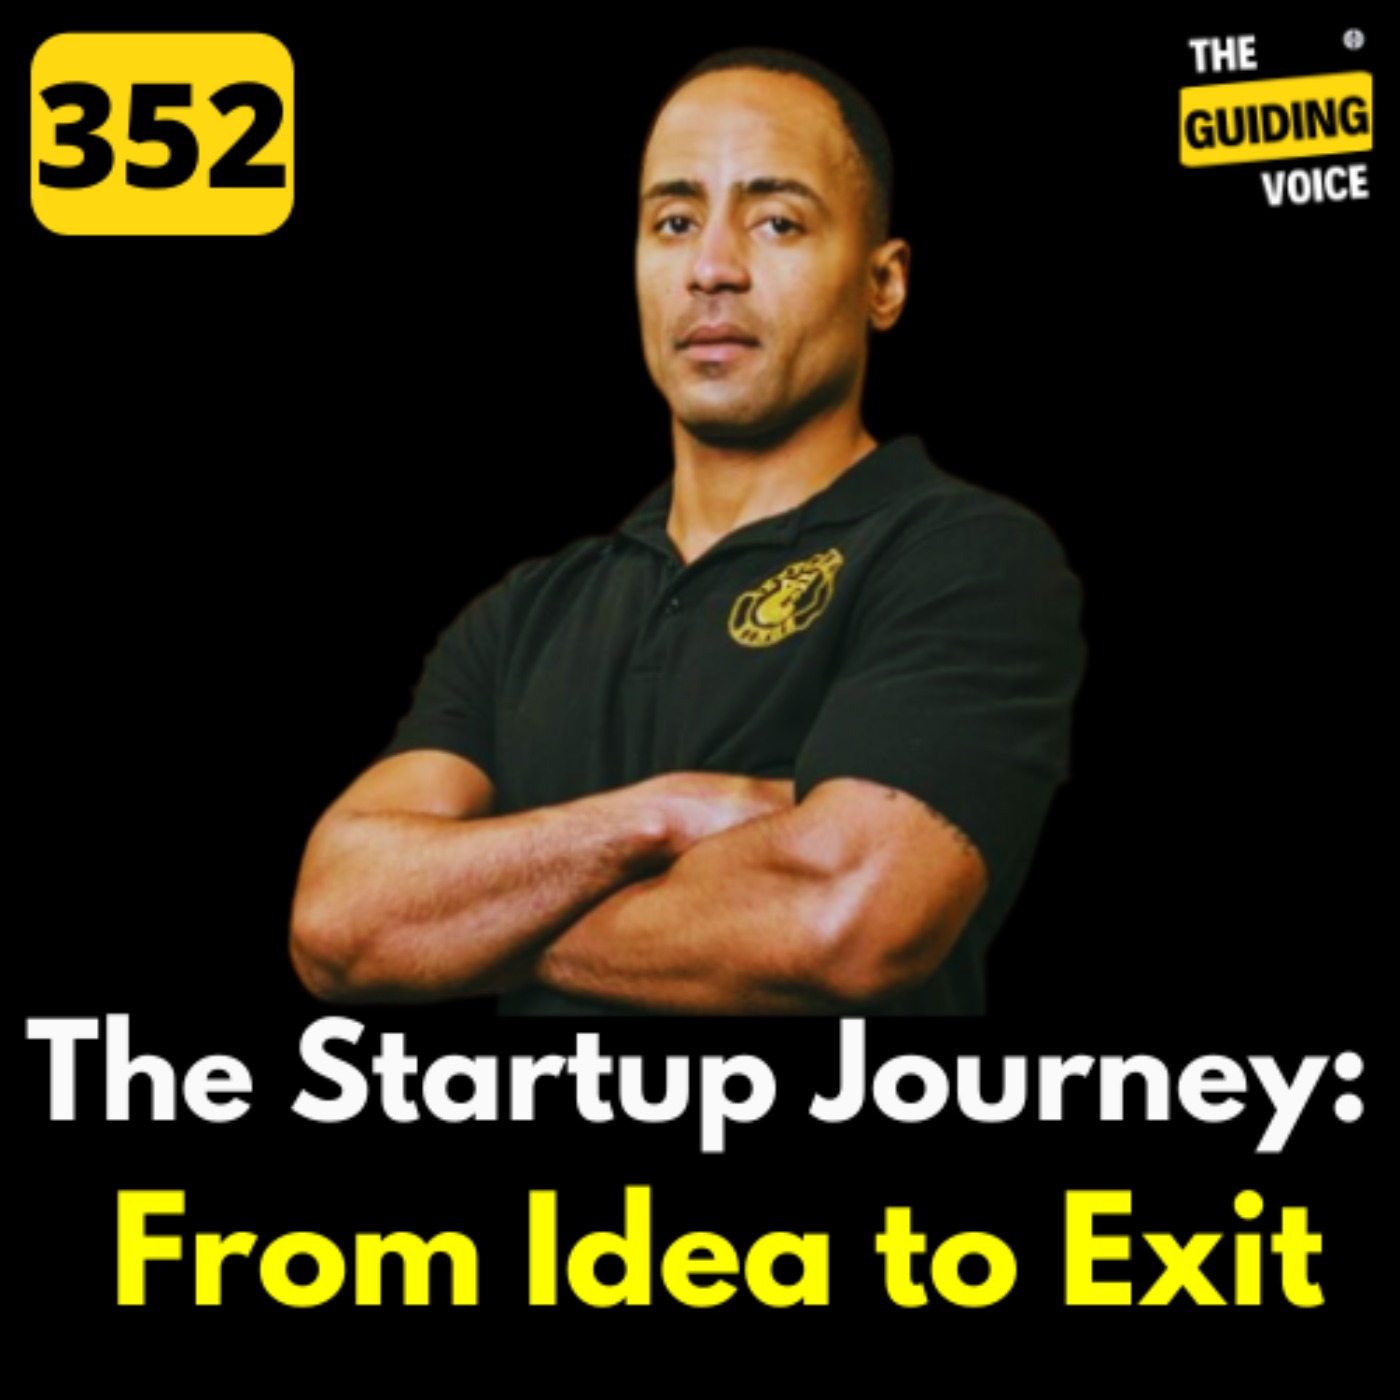 The Startup Journey: From Idea to Exit (Lessons from a Serial entrepreneur)  | Chad Price | #TGV352